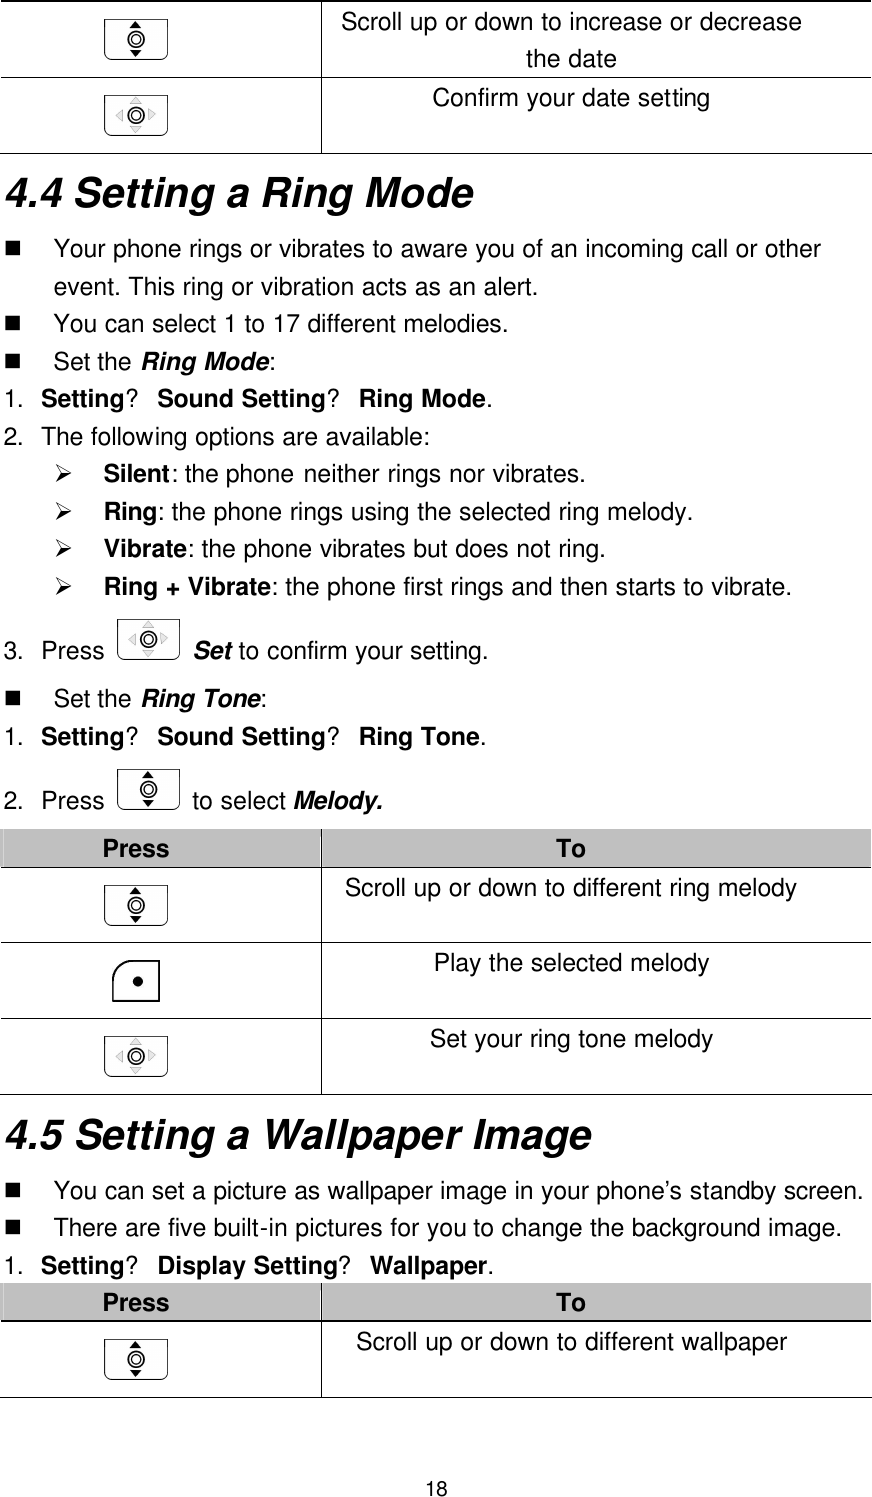  18  Scroll up or down to increase or decrease the date  Confirm your date setting 4.4 Setting a Ring Mode n Your phone rings or vibrates to aware you of an incoming call or other event. This ring or vibration acts as an alert. n You can select 1 to 17 different melodies. n Set the Ring Mode: 1. Setting? Sound Setting? Ring Mode. 2. The following options are available: Ø Silent: the phone neither rings nor vibrates. Ø Ring: the phone rings using the selected ring melody. Ø Vibrate: the phone vibrates but does not ring. Ø Ring + Vibrate: the phone first rings and then starts to vibrate. 3. Press   Set to confirm your setting. n Set the Ring Tone: 1. Setting? Sound Setting? Ring Tone. 2. Press   to select Melody. Press To  Scroll up or down to different ring melody  Play the selected melody  Set your ring tone melody 4.5 Setting a Wallpaper Image n You can set a picture as wallpaper image in your phone’s standby screen. n There are five built-in pictures for you to change the background image. 1. Setting? Display Setting? Wallpaper. Press To  Scroll up or down to different wallpaper 